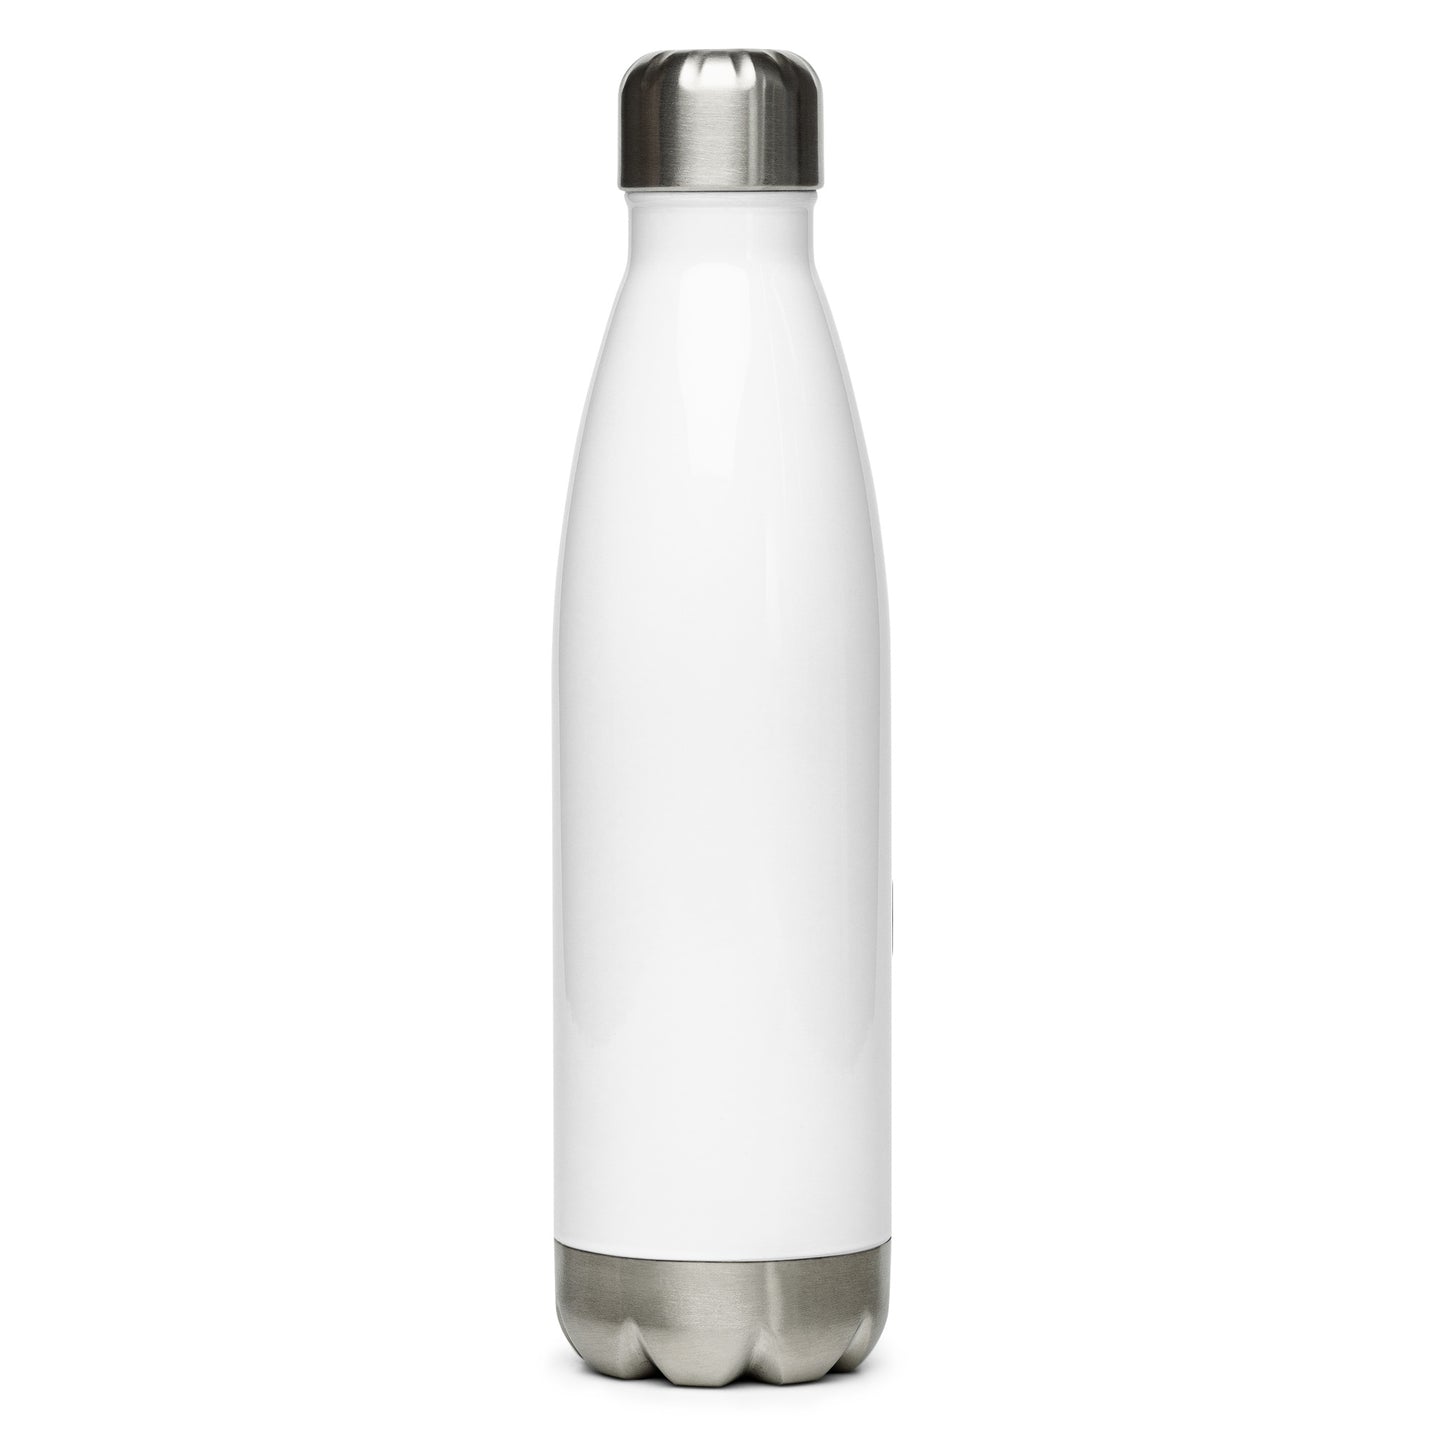 Pink Hillbilly Tactical Logo Stainless Steel Water Bottle